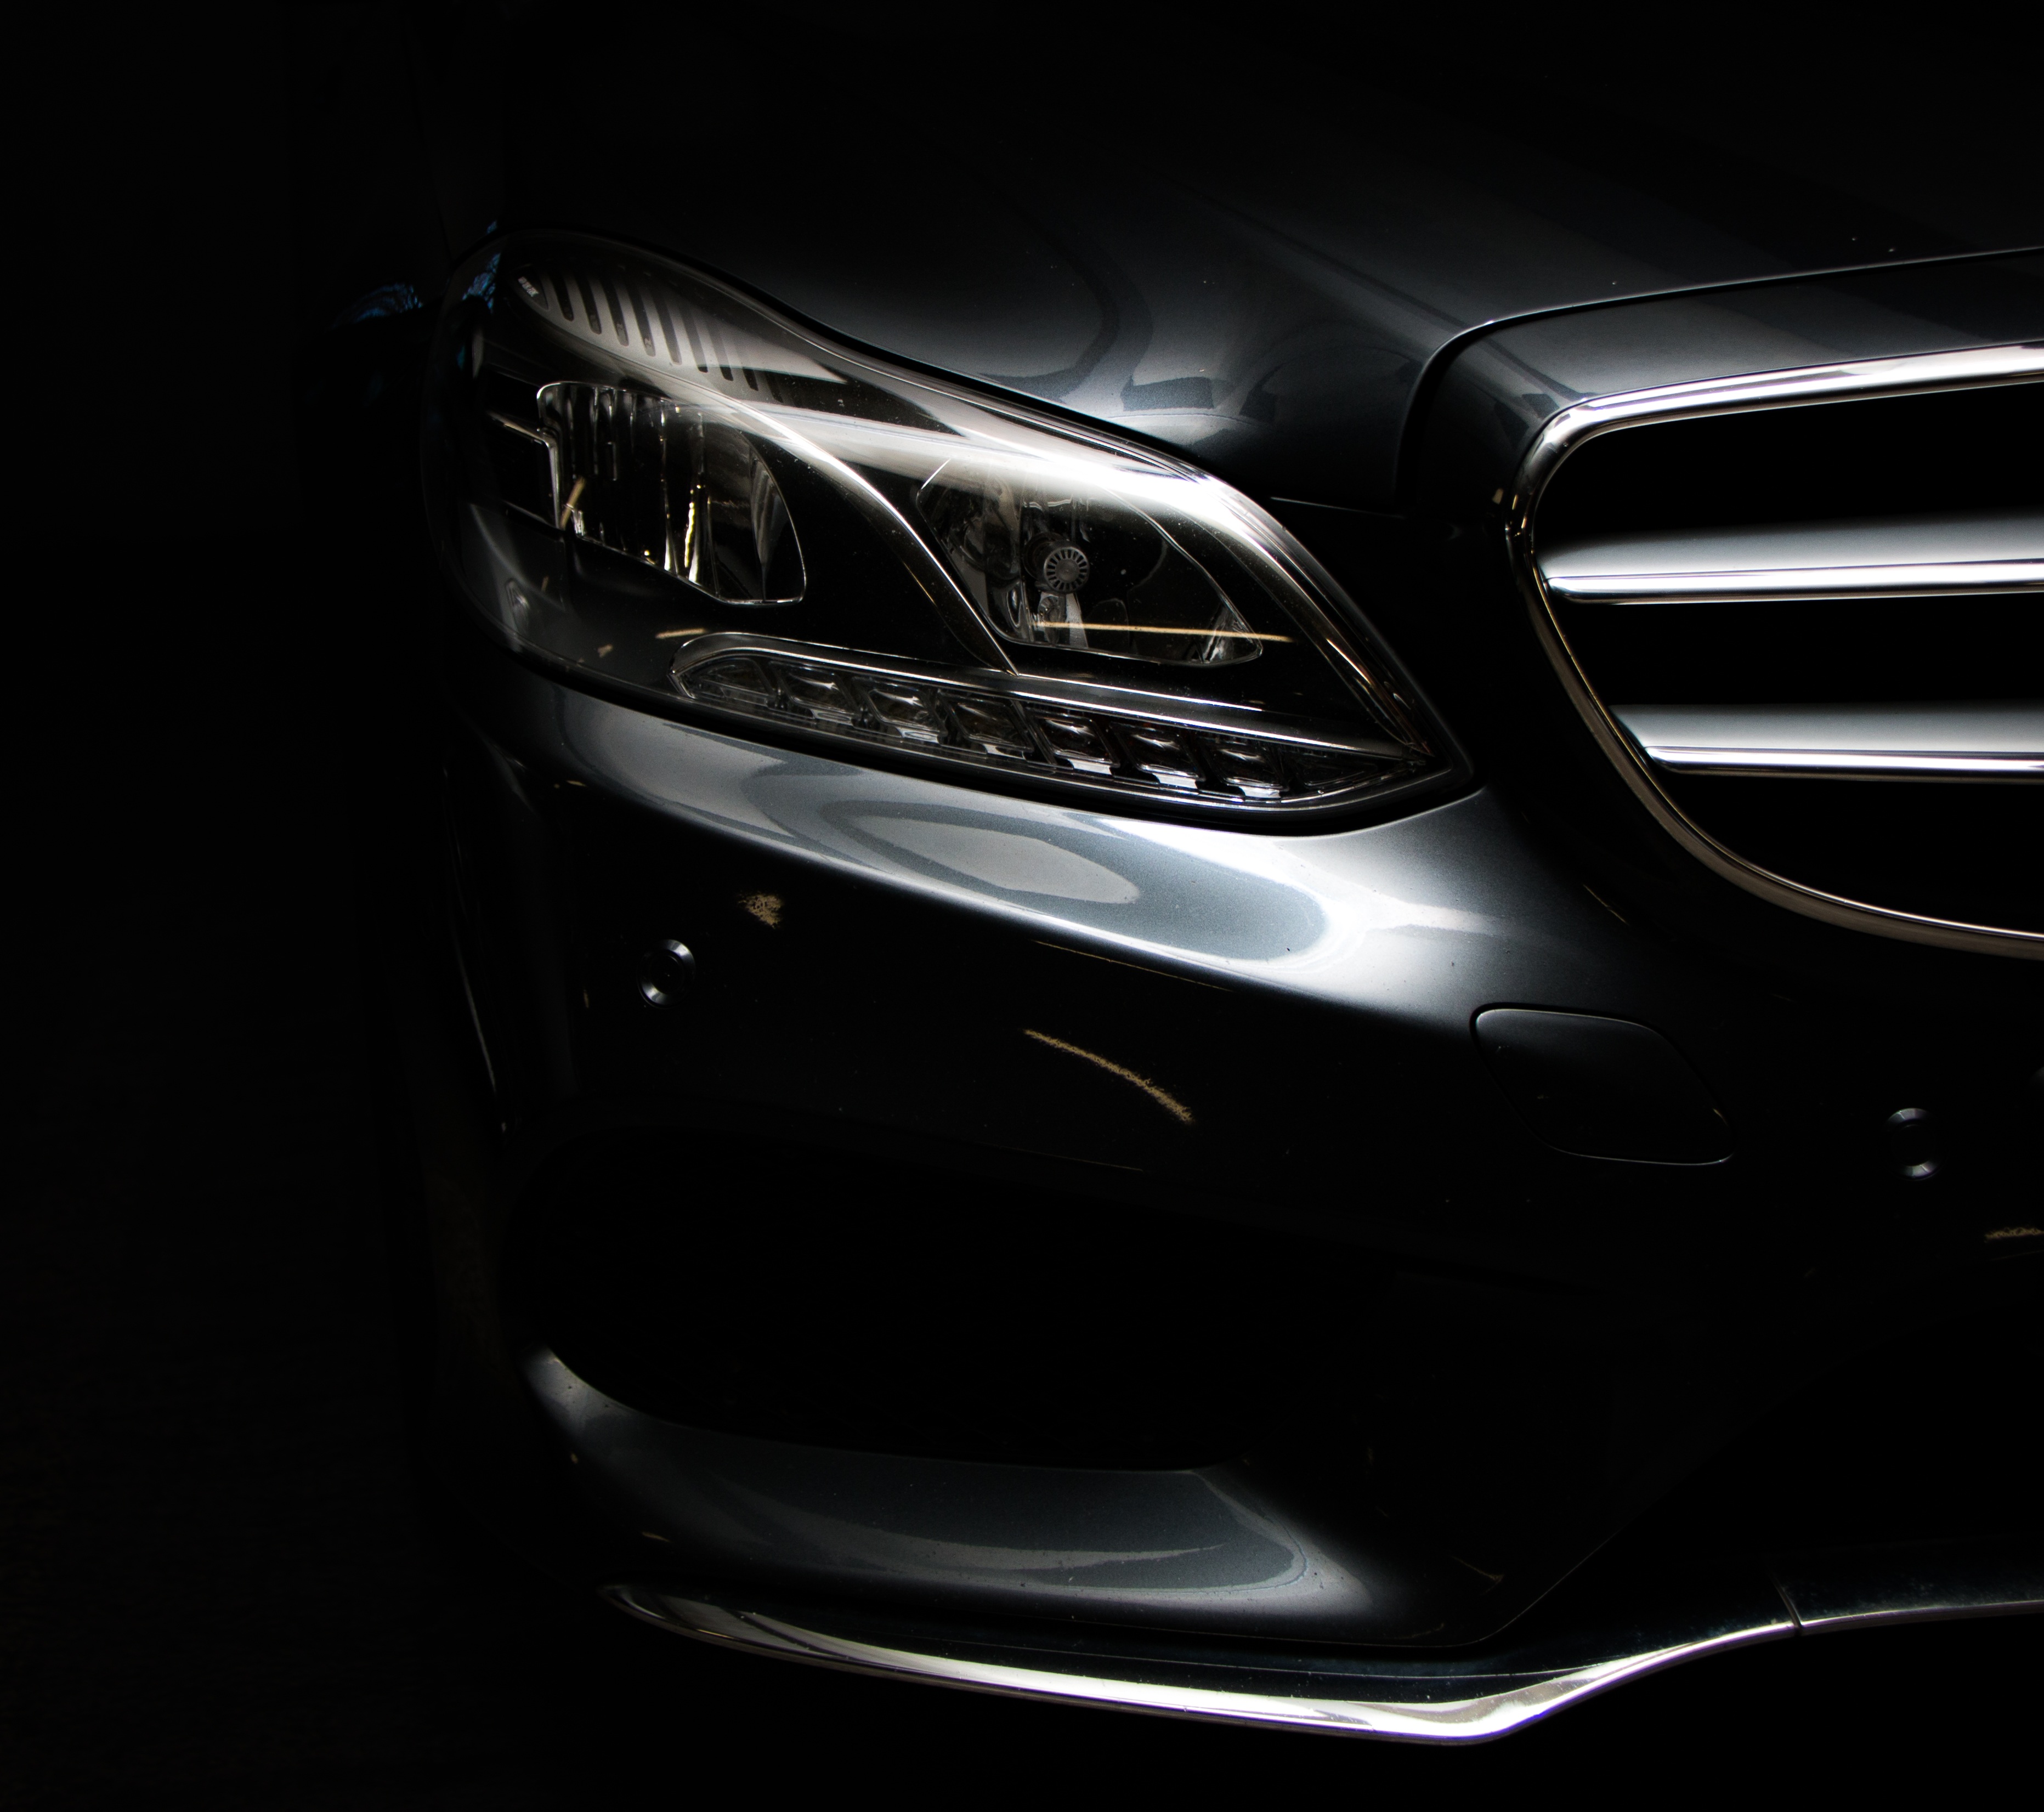 151032 Screensavers and Wallpapers Silvery for phone. Download mercedes e-class, cars, dark, front view, mercedes, headlight, bumper, silver, silvery pictures for free